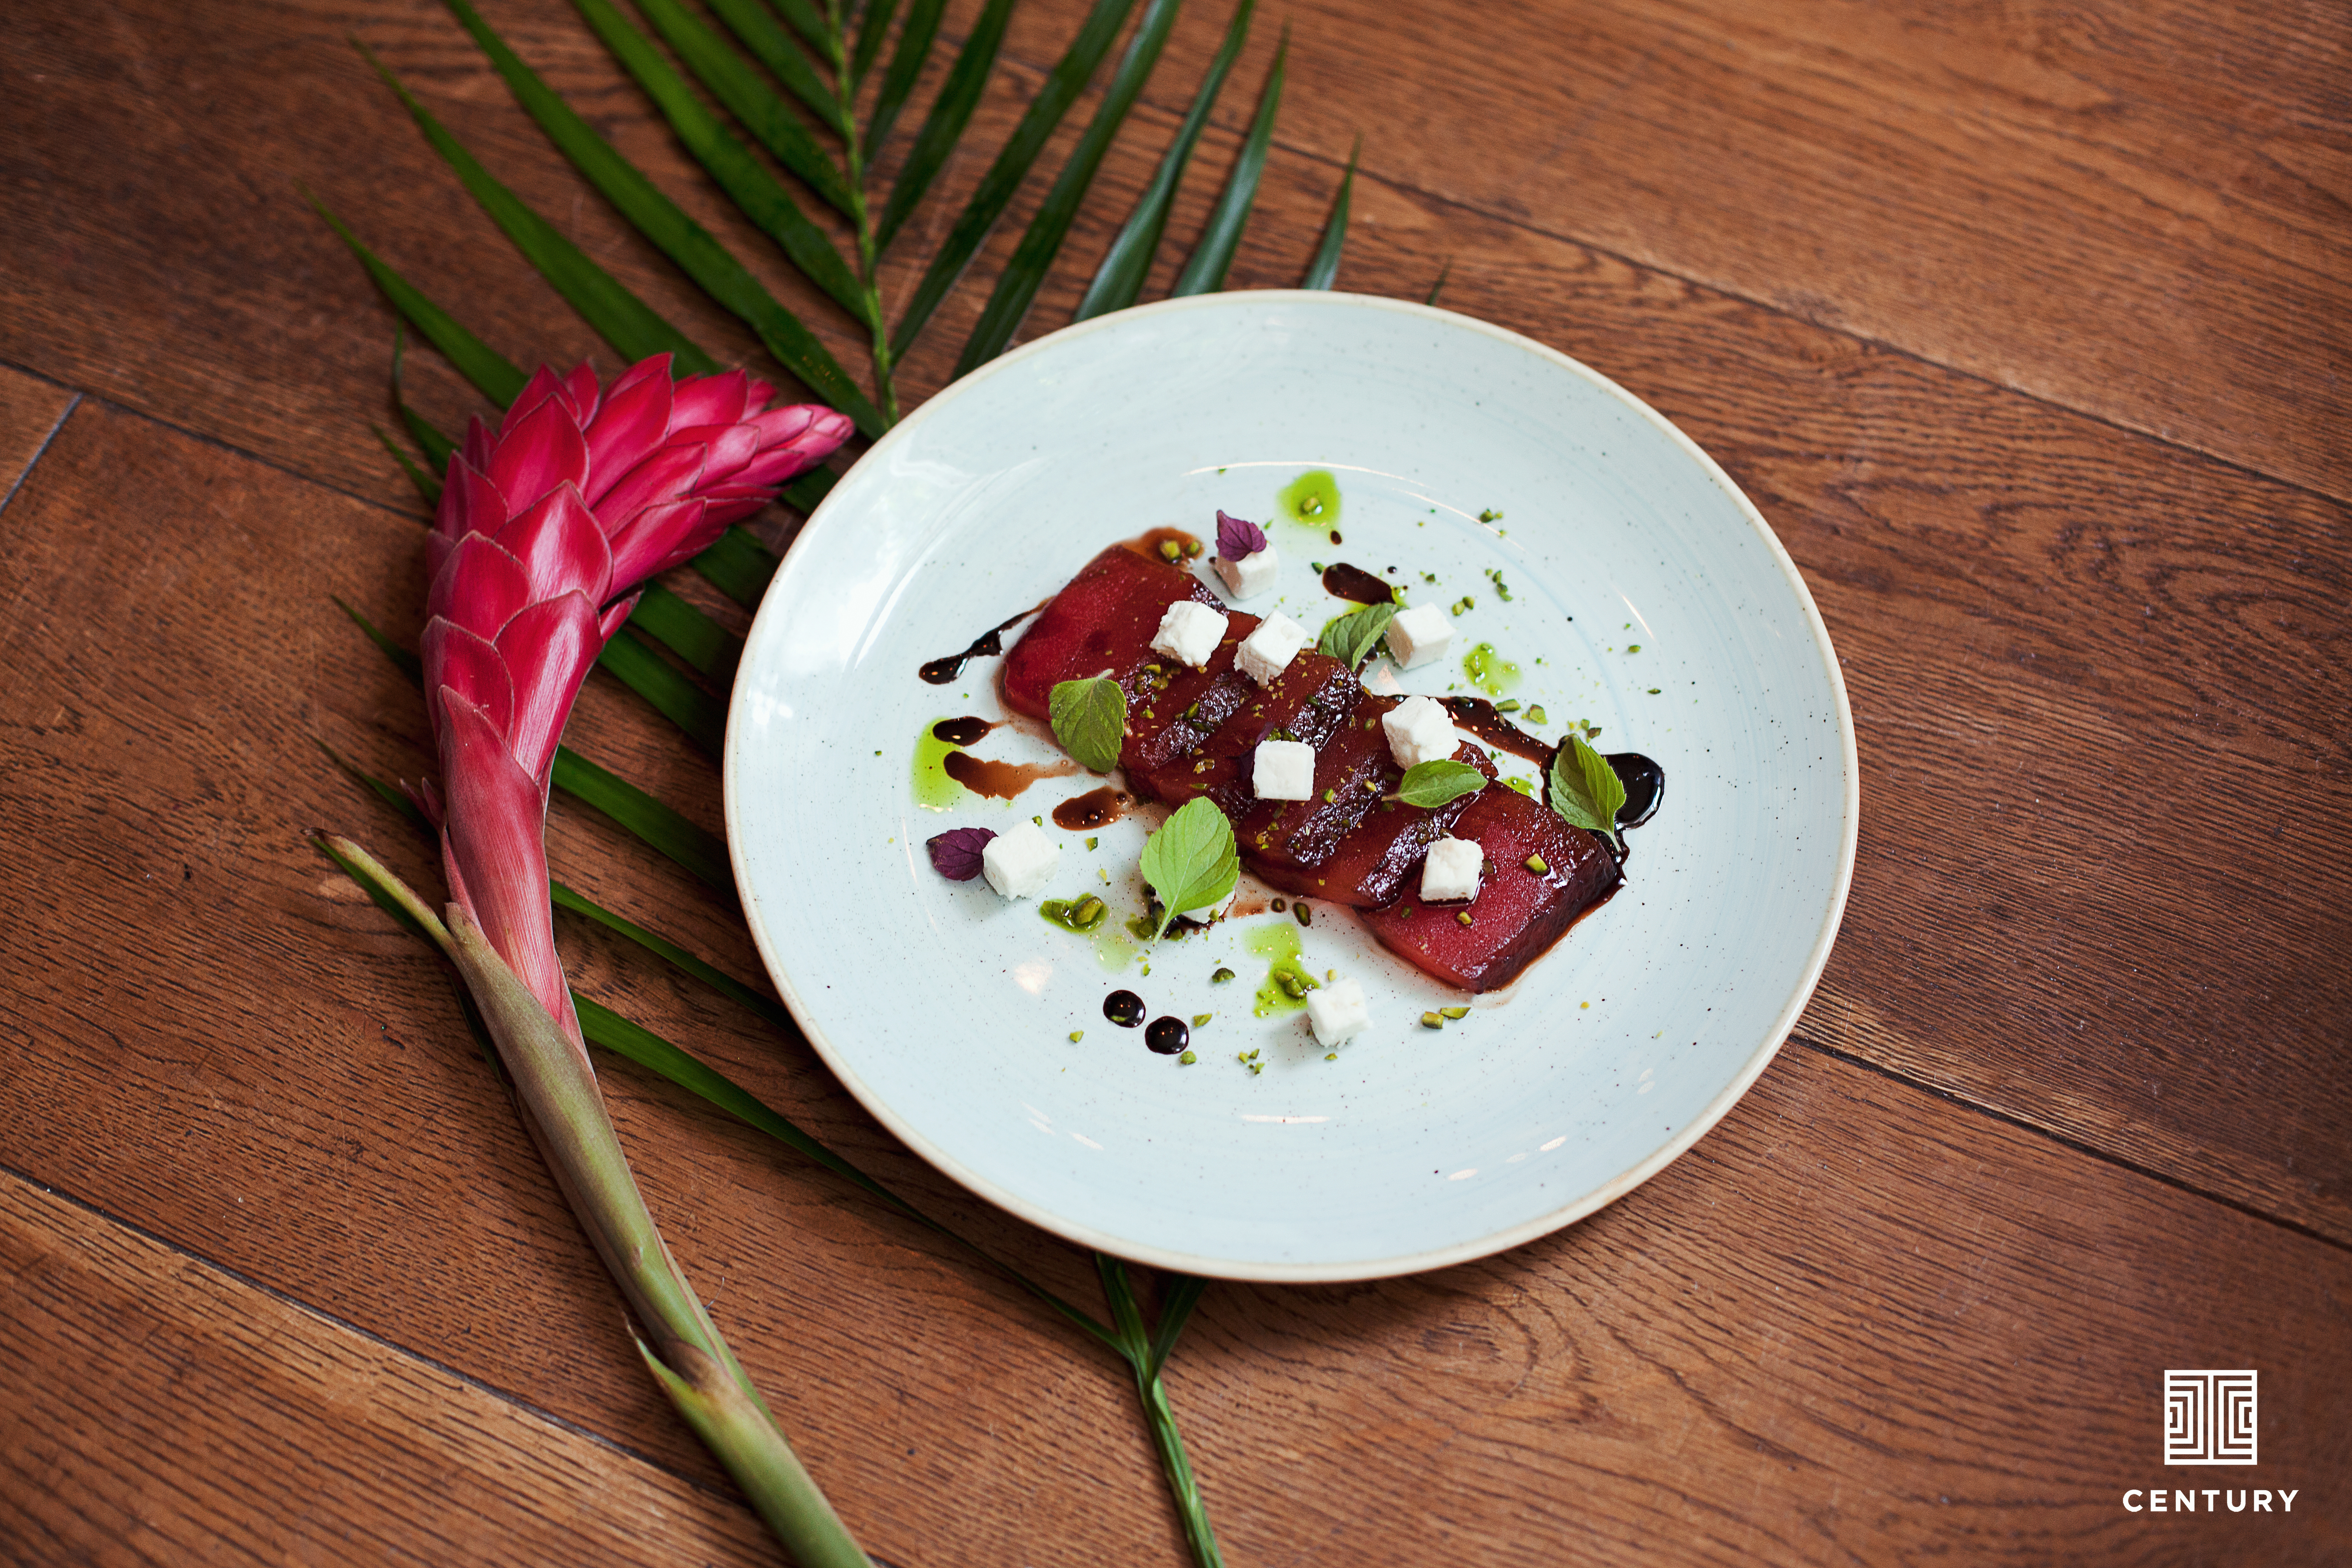 JUNE MONTHLY RECIPE: WATERMELON STEAK WITH AGED BALSAMIC, ORGANIC FETA & PISTACHIO SALT AND MINT